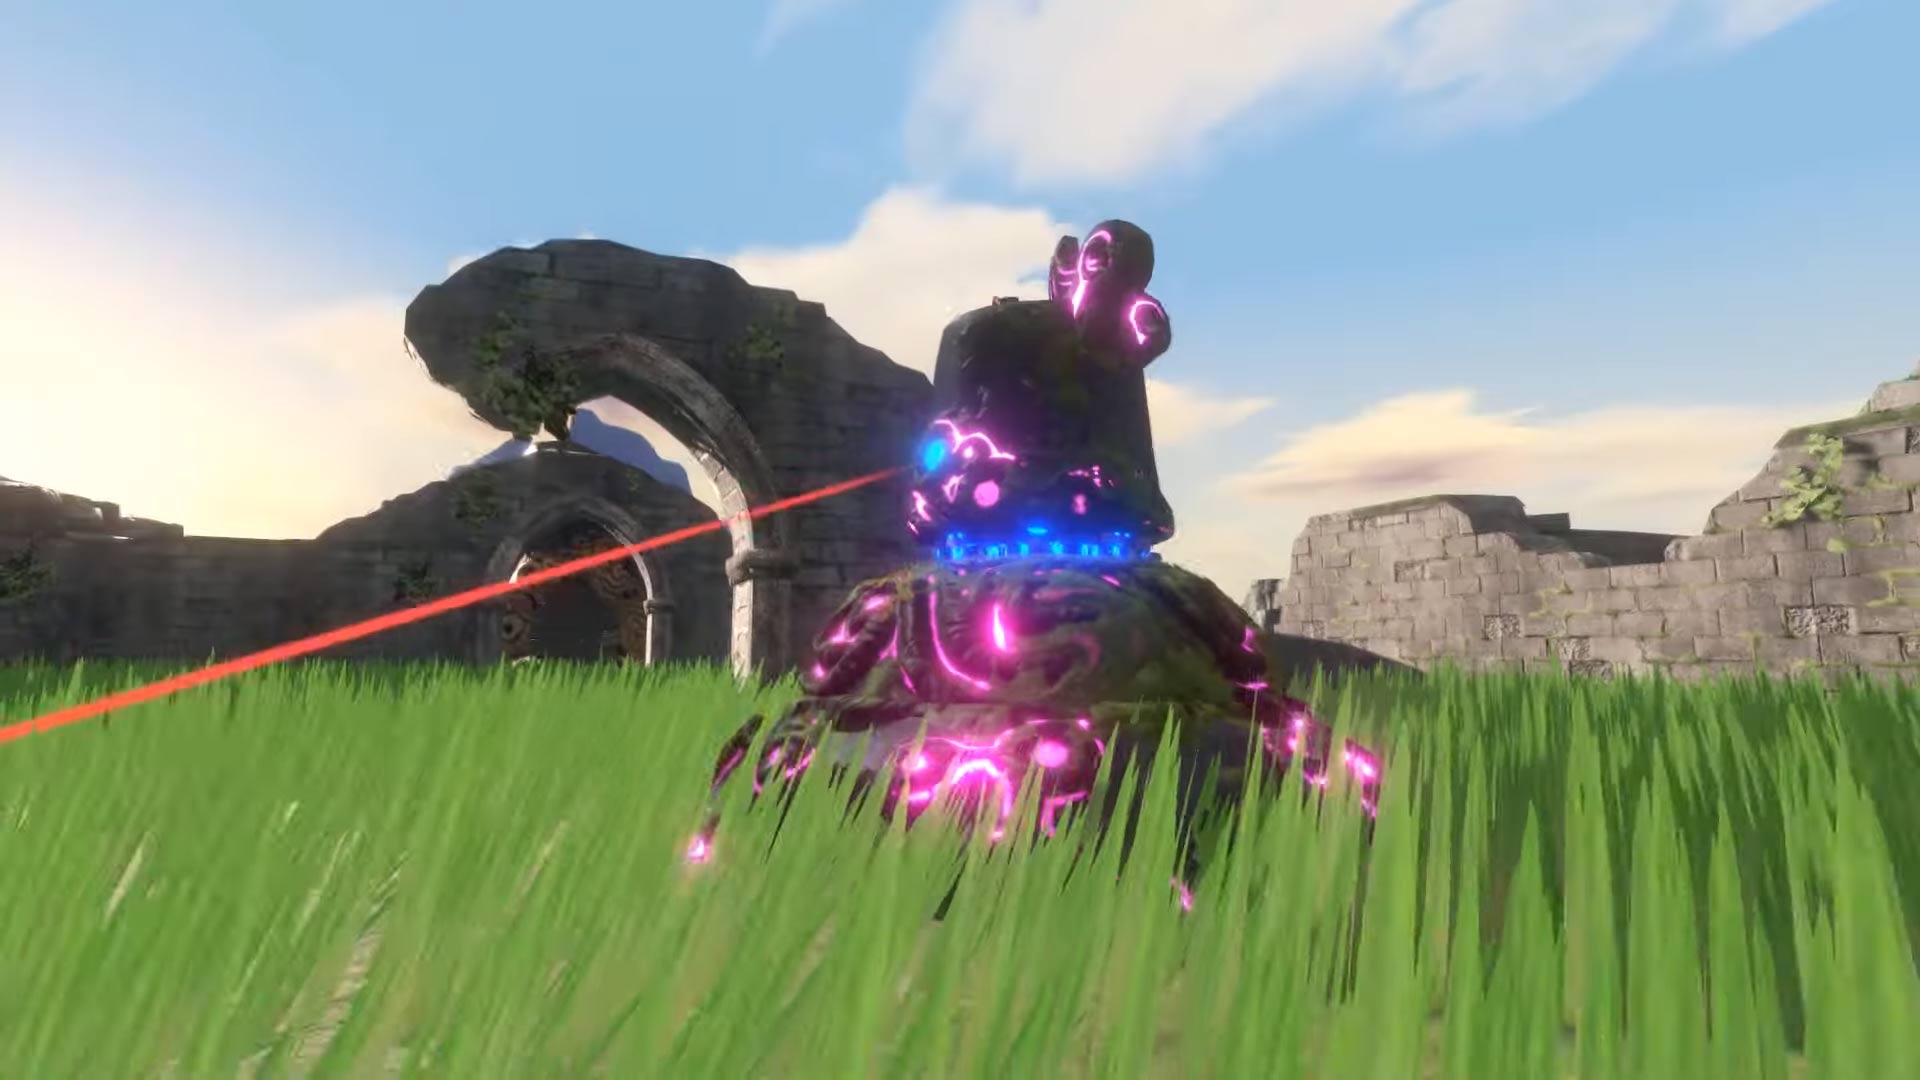 This Zelda: Breath of the Wild multiplayer mod is so good that